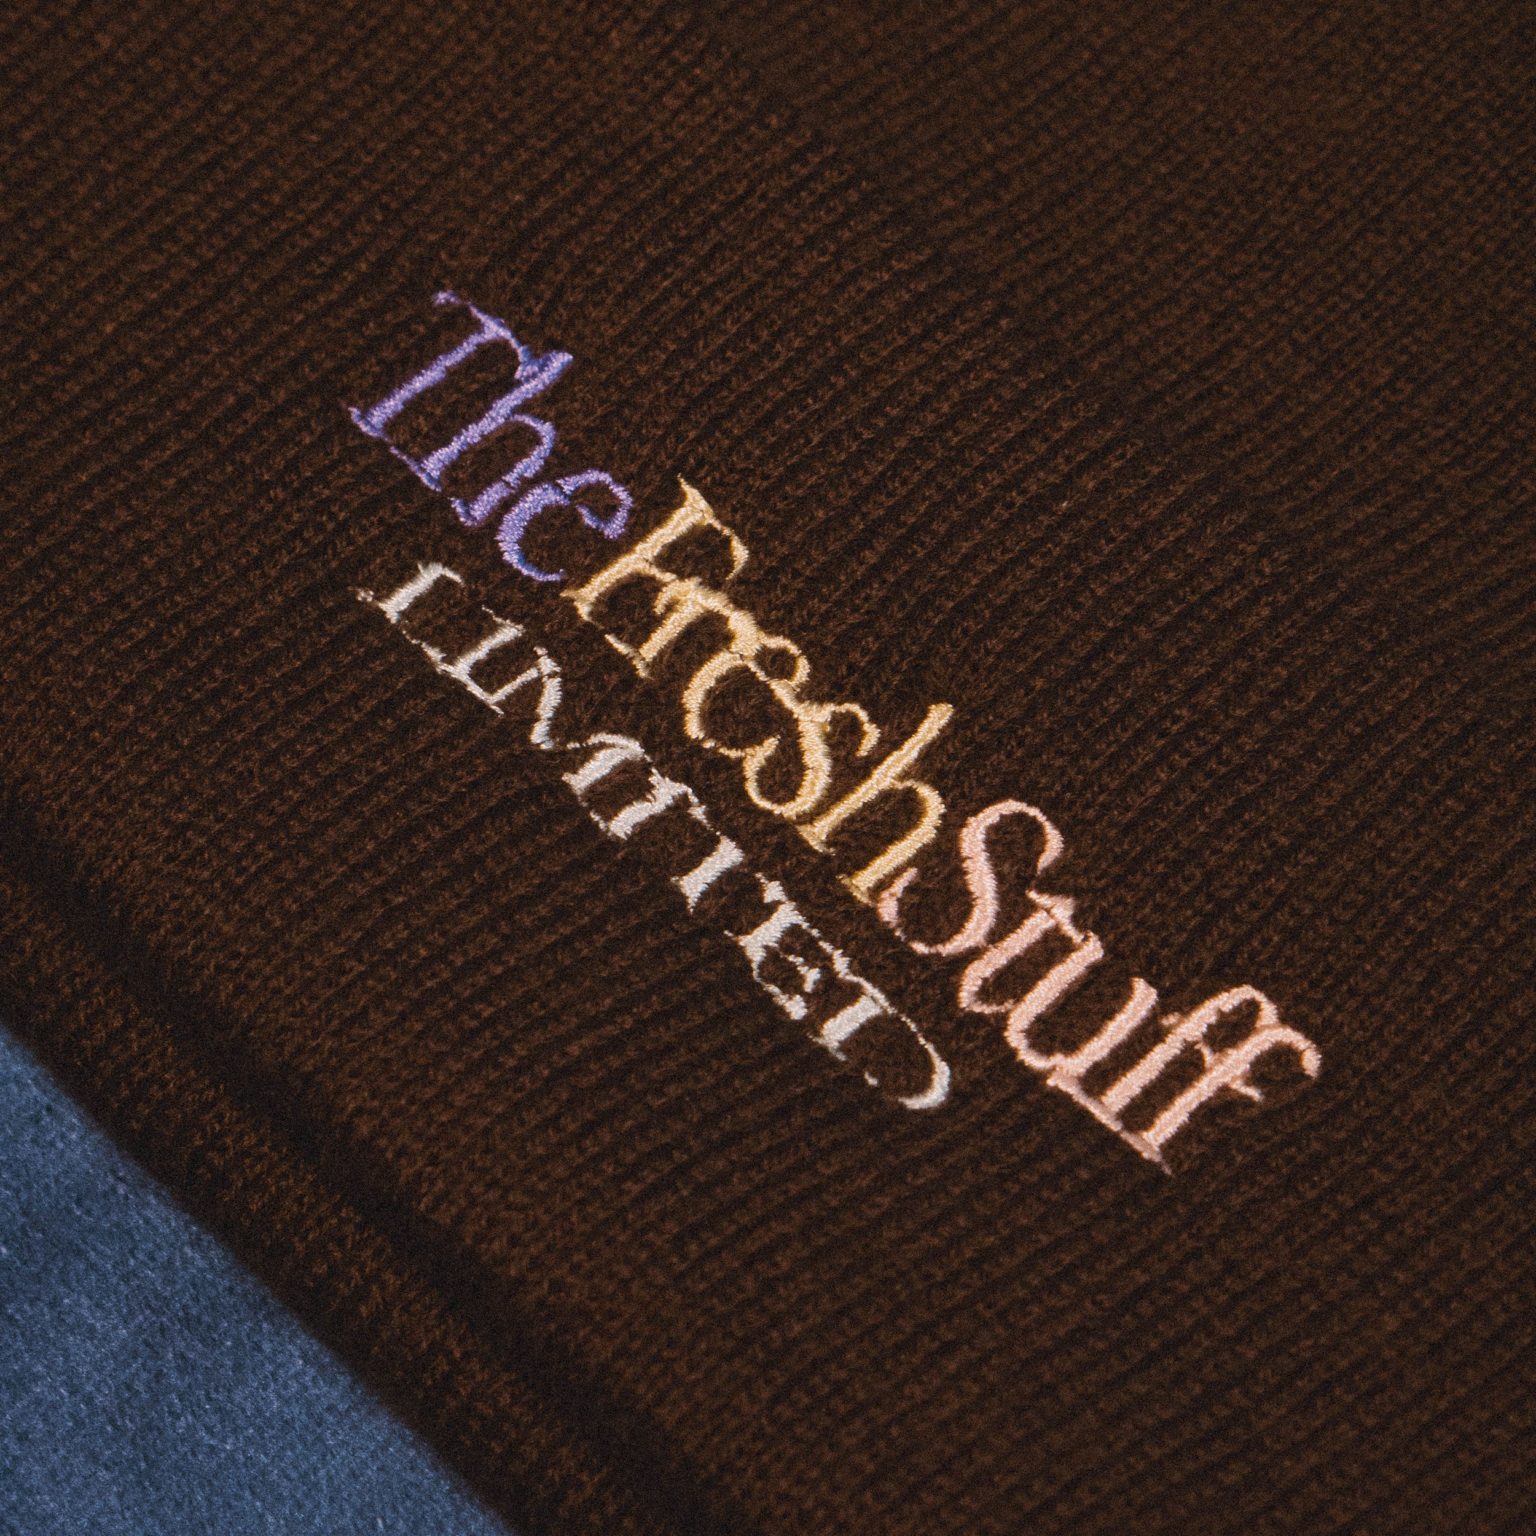 The Fresh Stuff Limited – Brown Embroidered Beanie